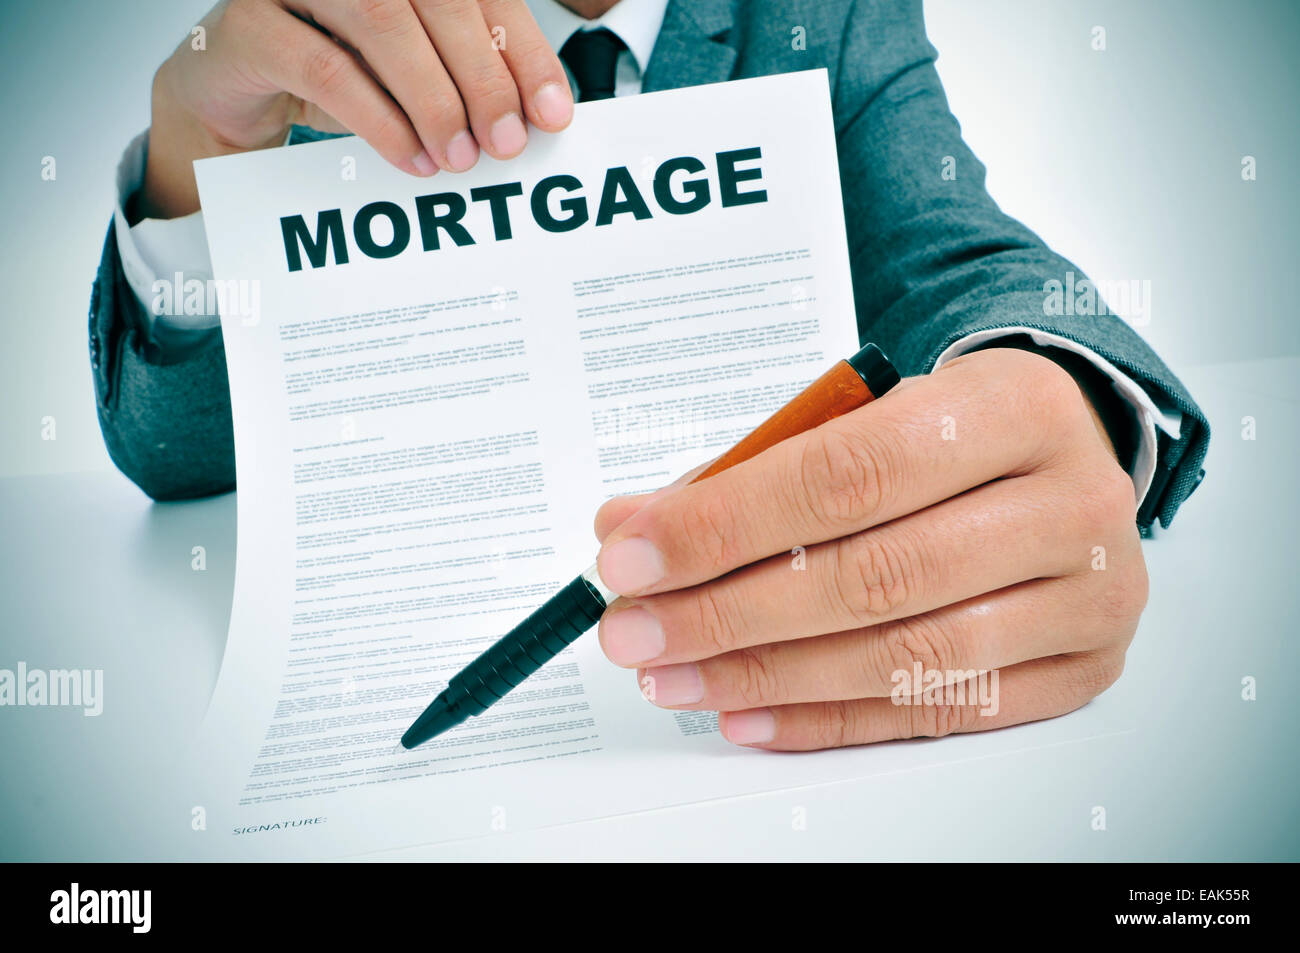 man wearing a suit sitting in a table showing a mortgage loan contract and where the signer must sign Stock Photo